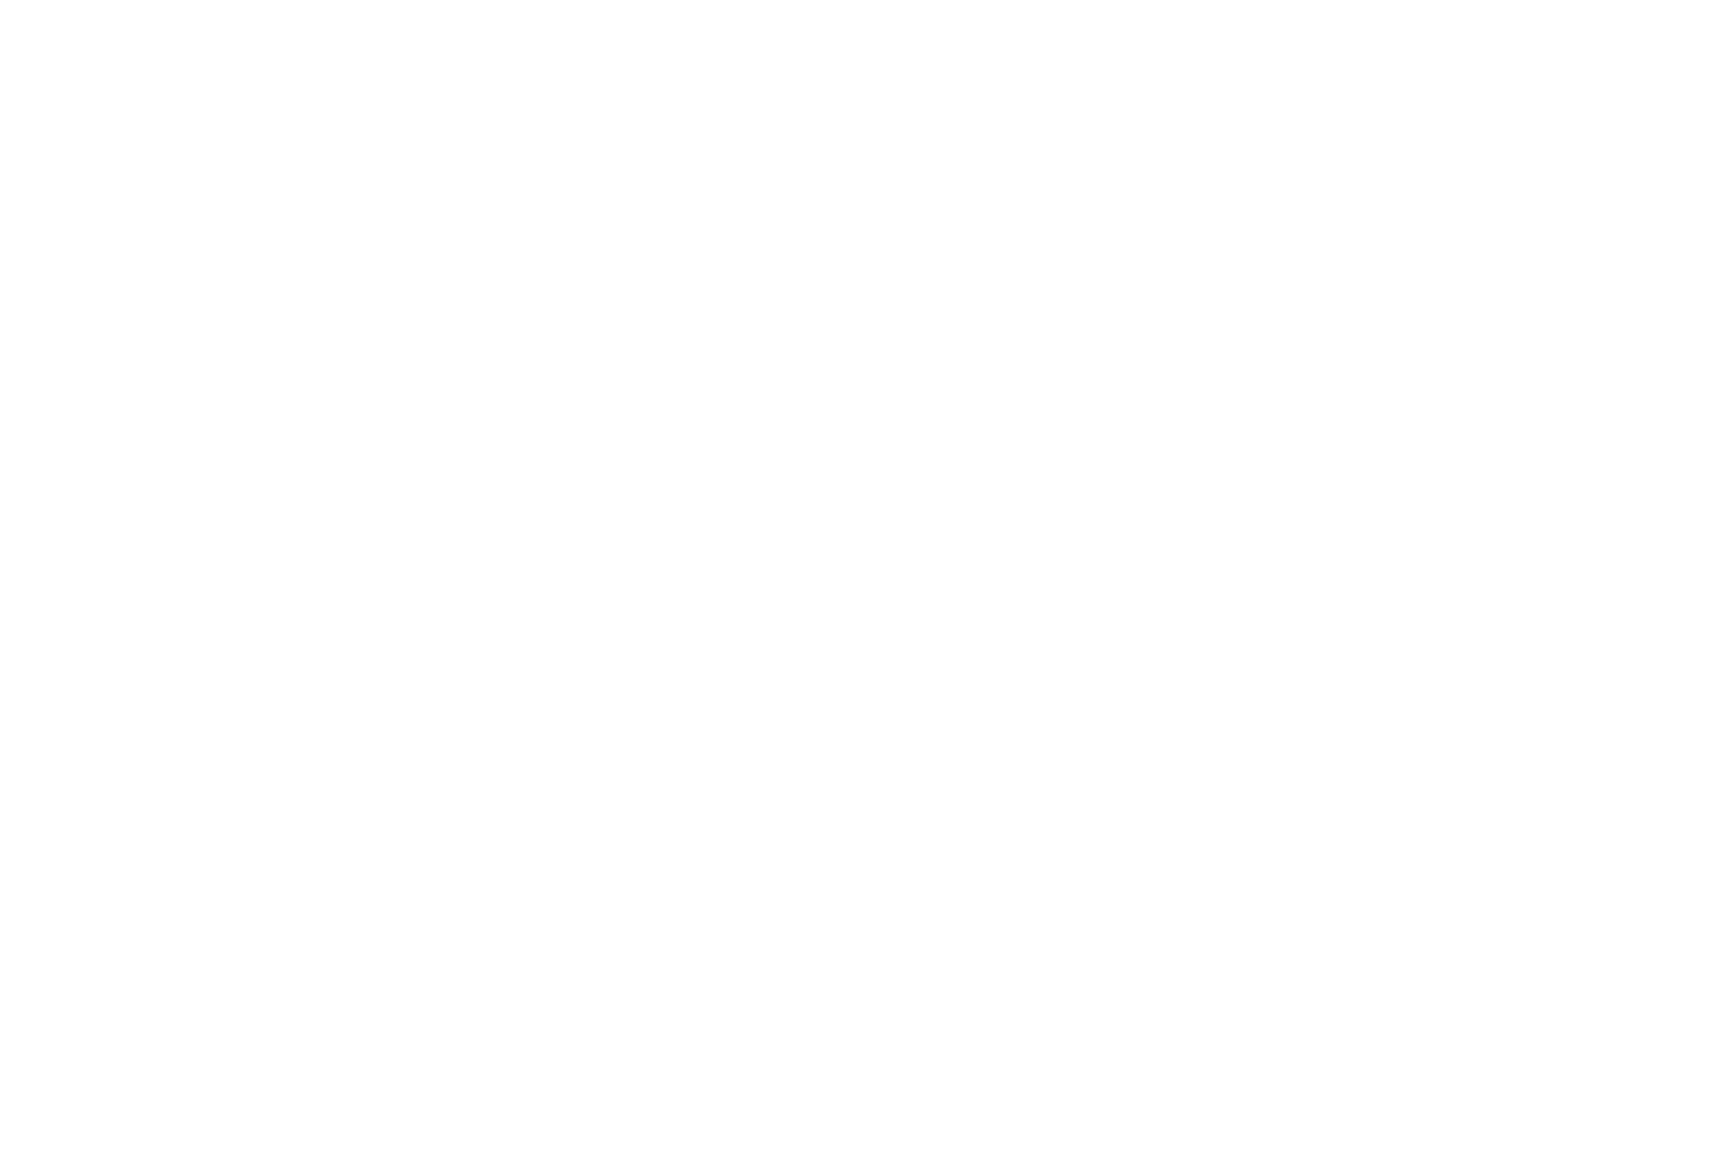 OFFICIAL SELECTION - Red Finch Film Festival - 2020 (1).png